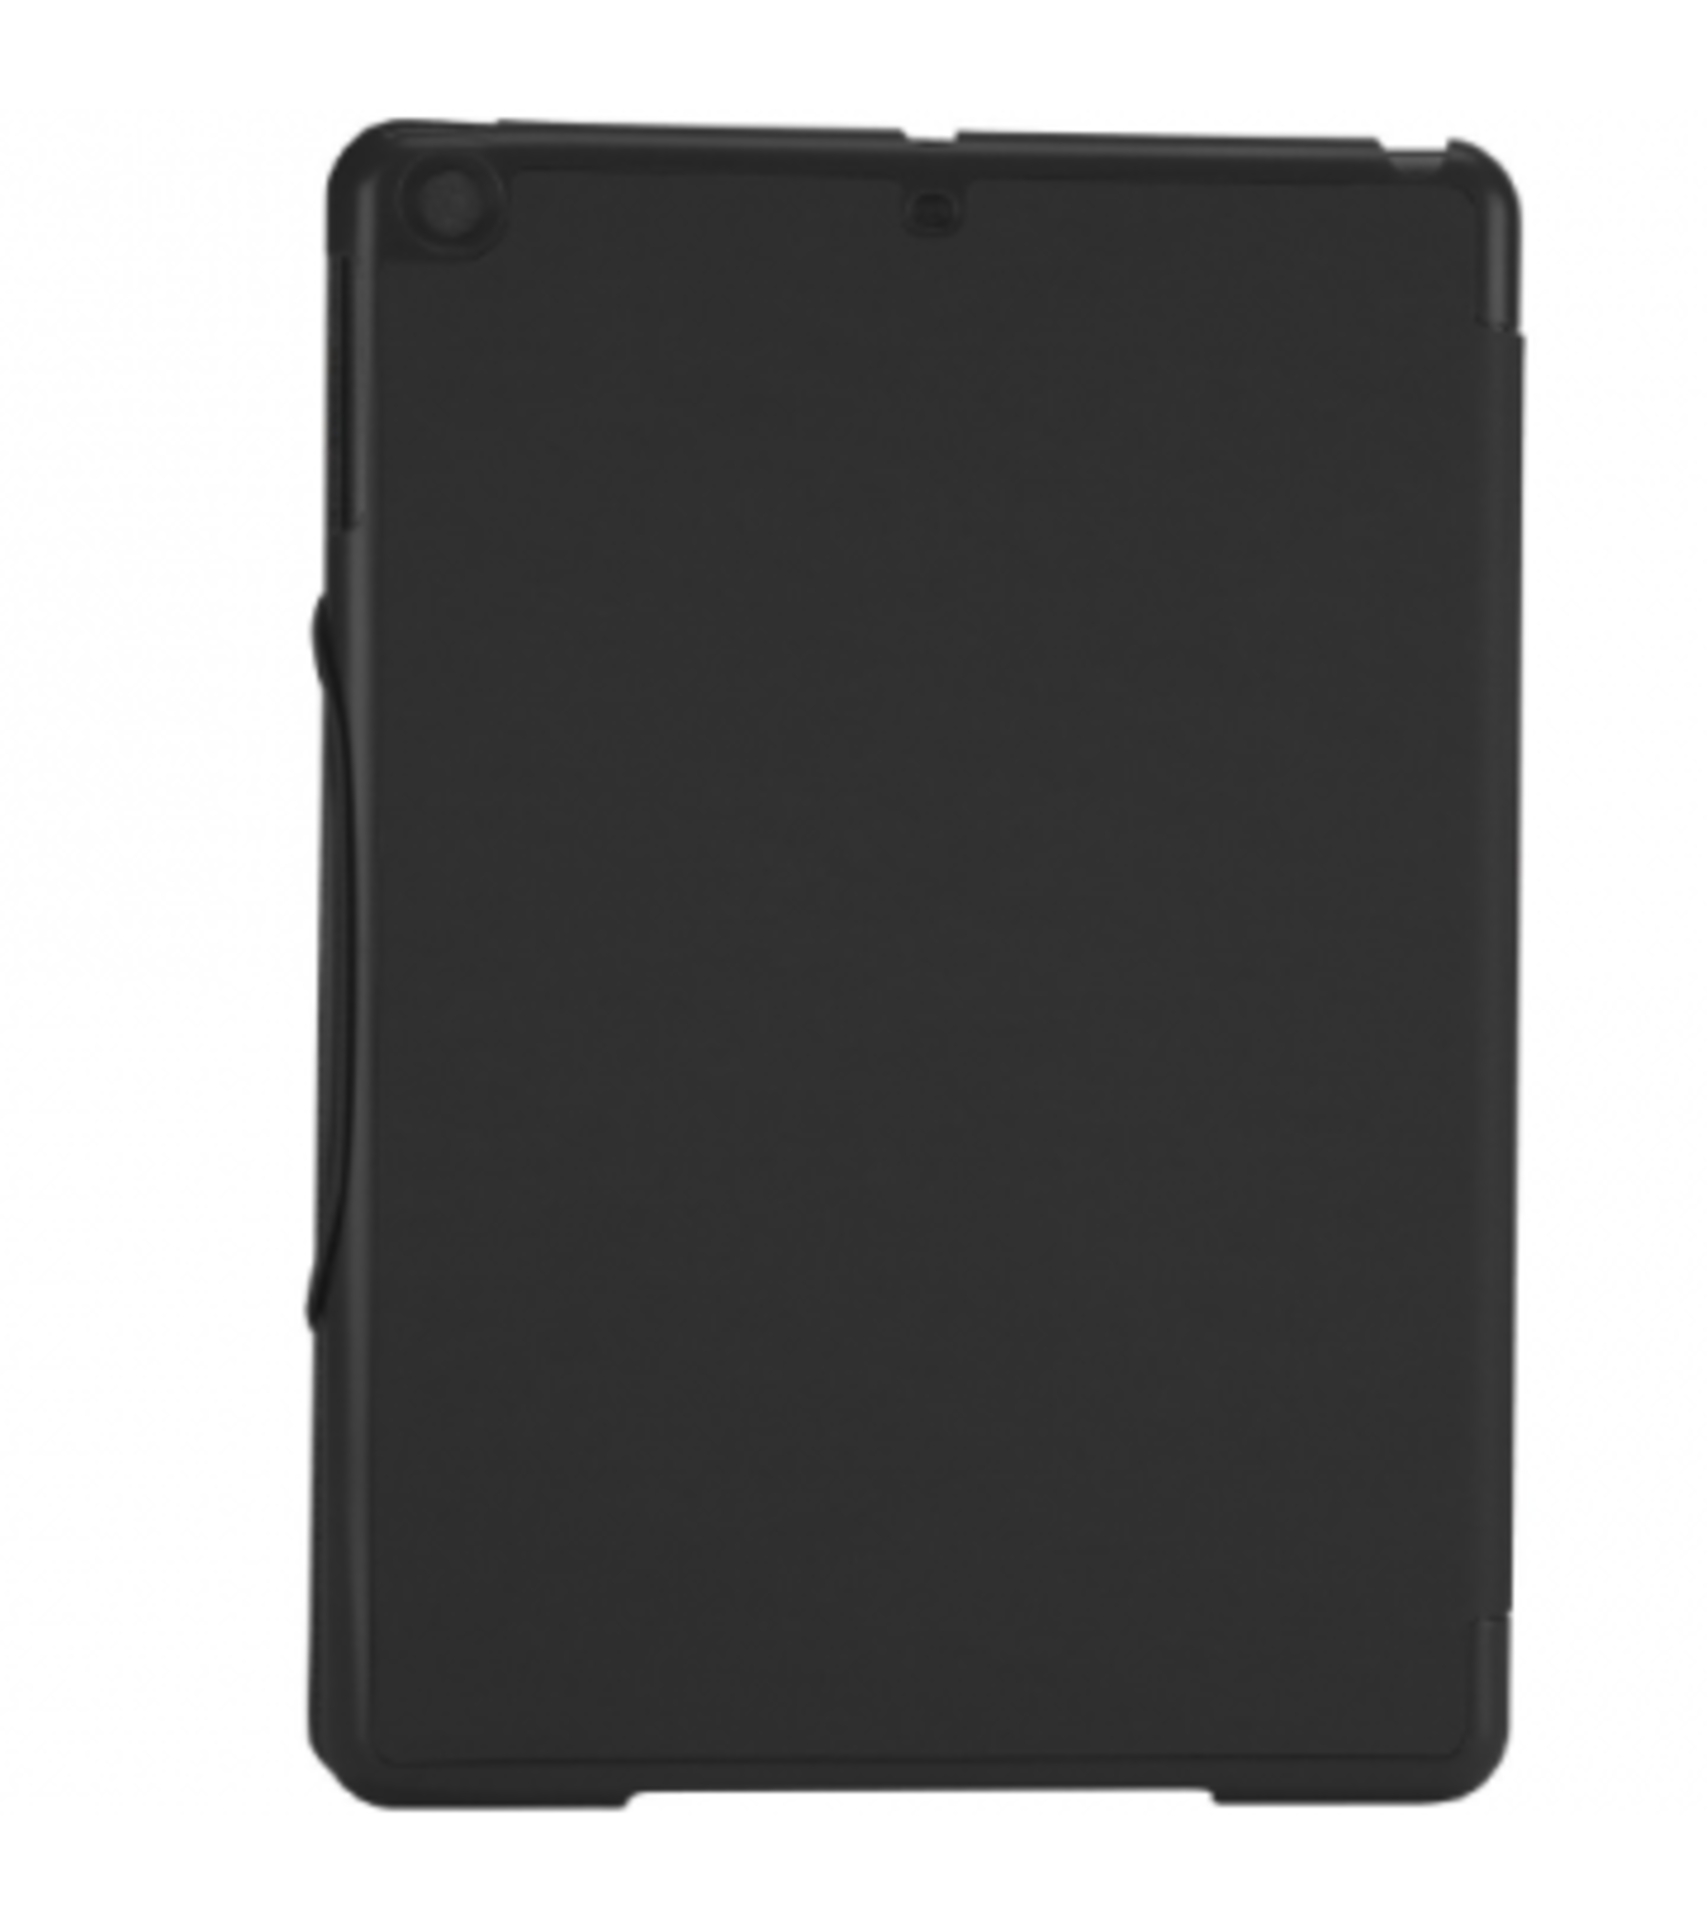 485 x Targus Classic iPad Air Click In Protection Cases - Black - Approx Retail £11,669 - New - Image 3 of 5